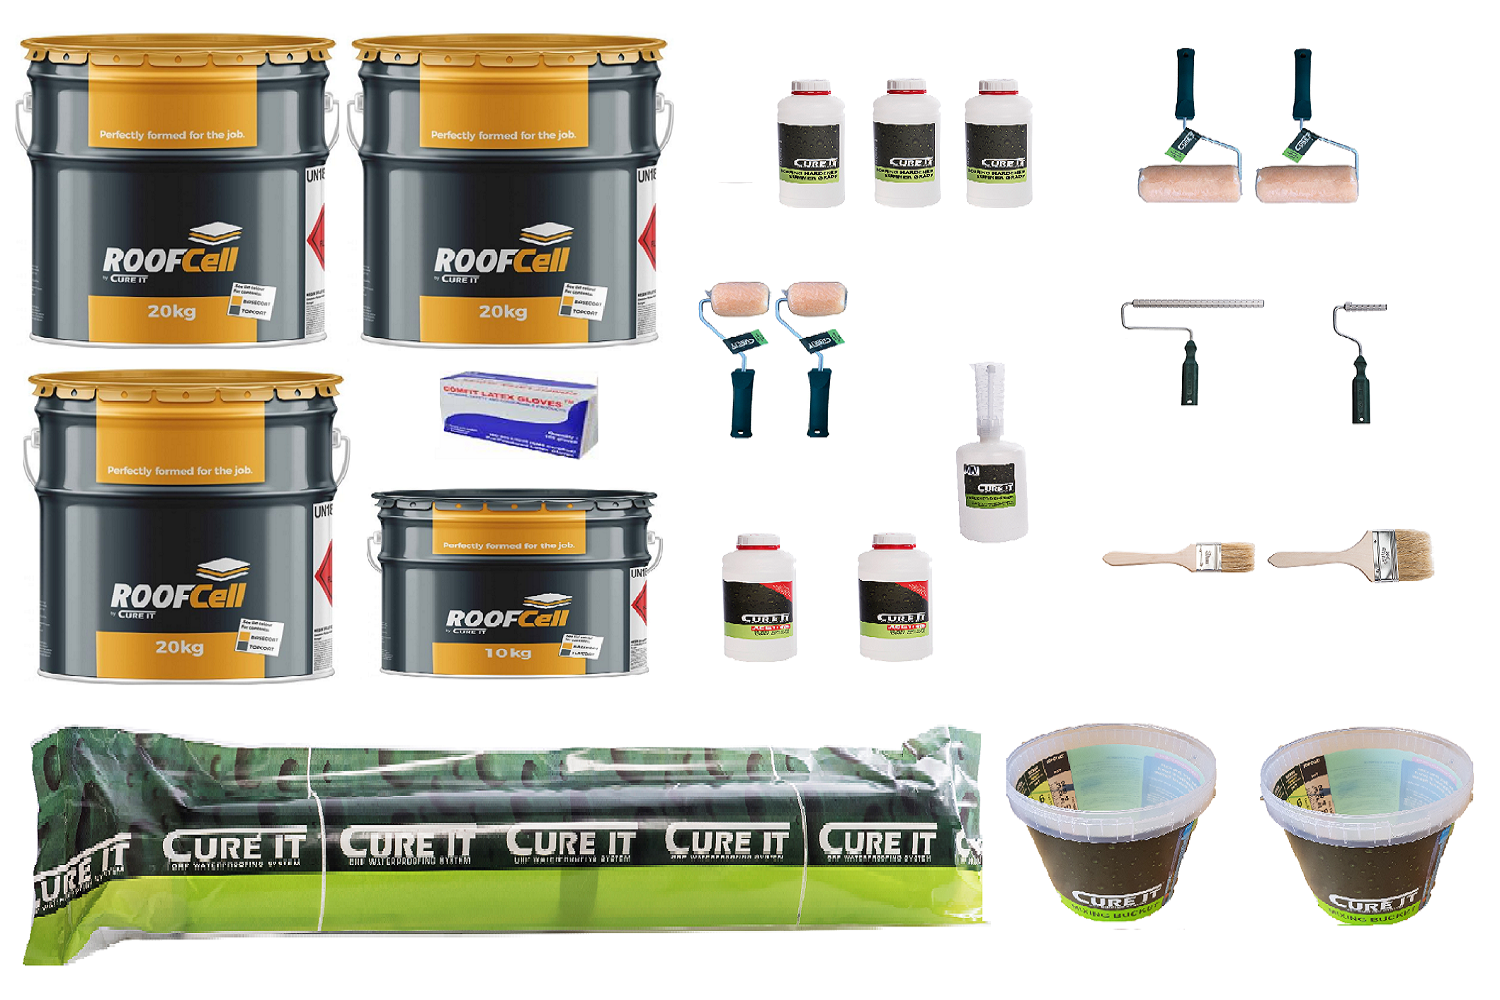 20m² Cure It ROOFCELL Roofing kit For ROUGH FELT